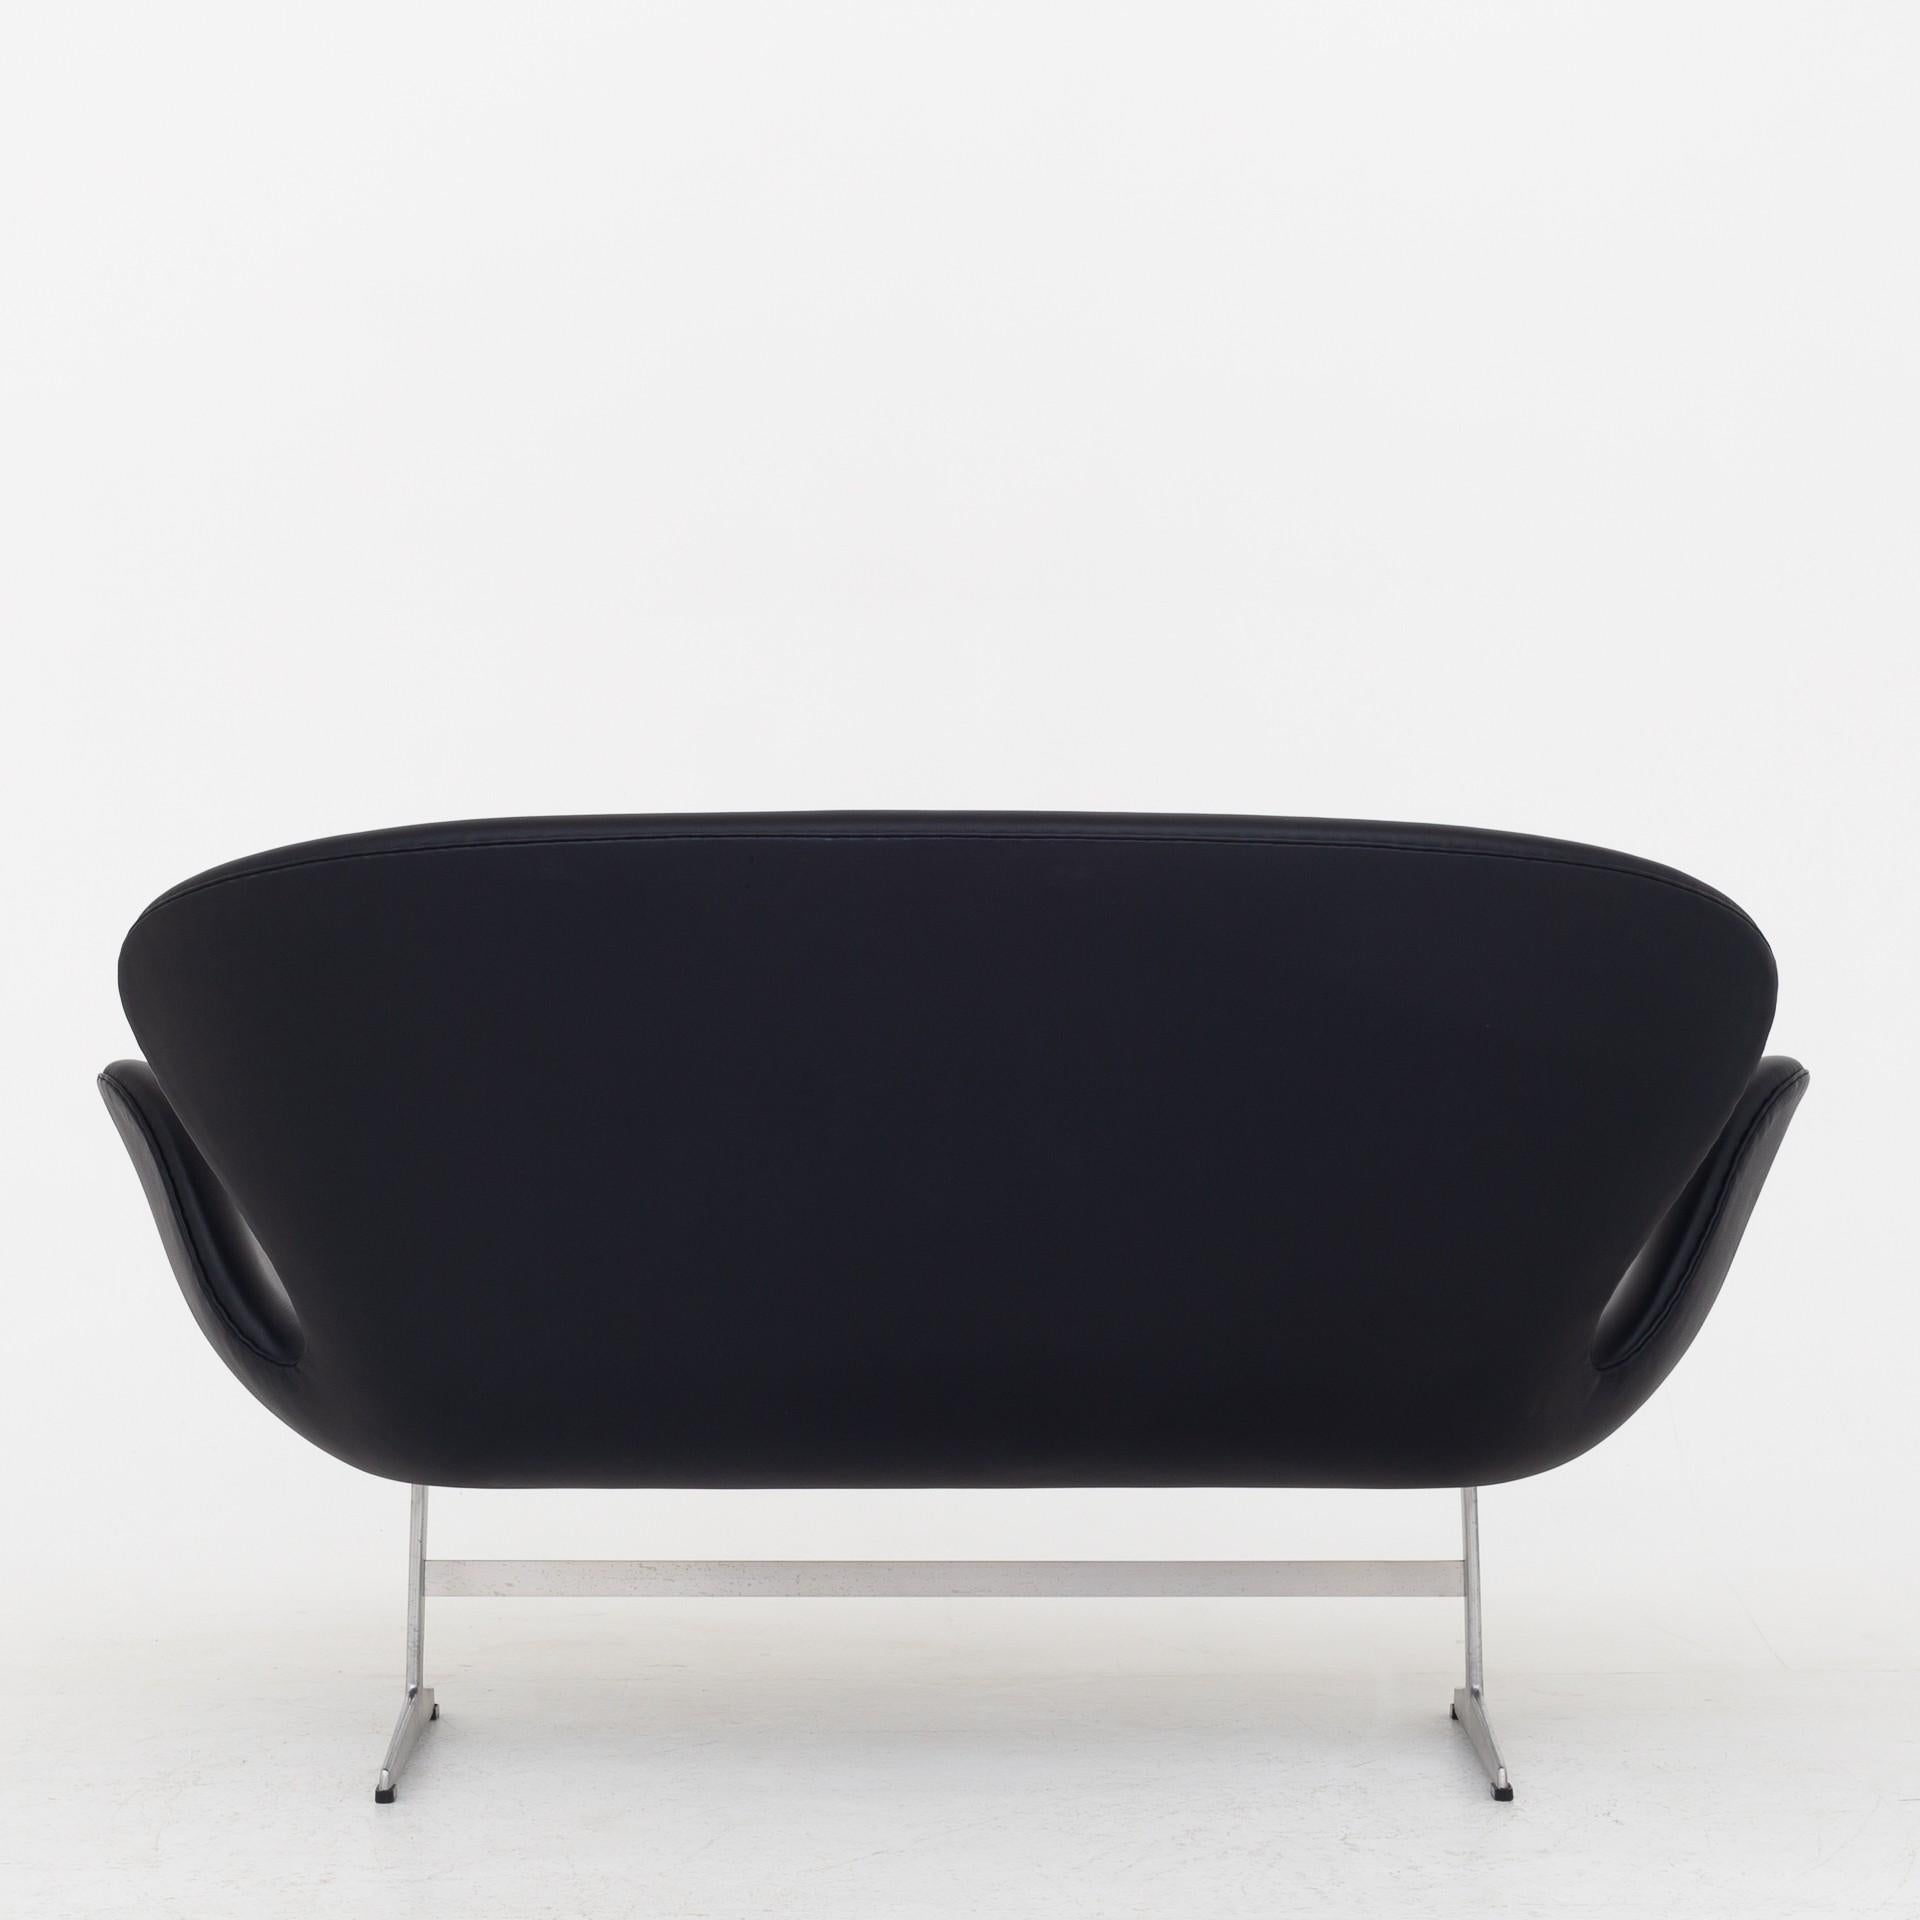 FH 3321 - Swan sofa in black leather and frame of steel. Designed in 1958. Maker Fritz Hansen.